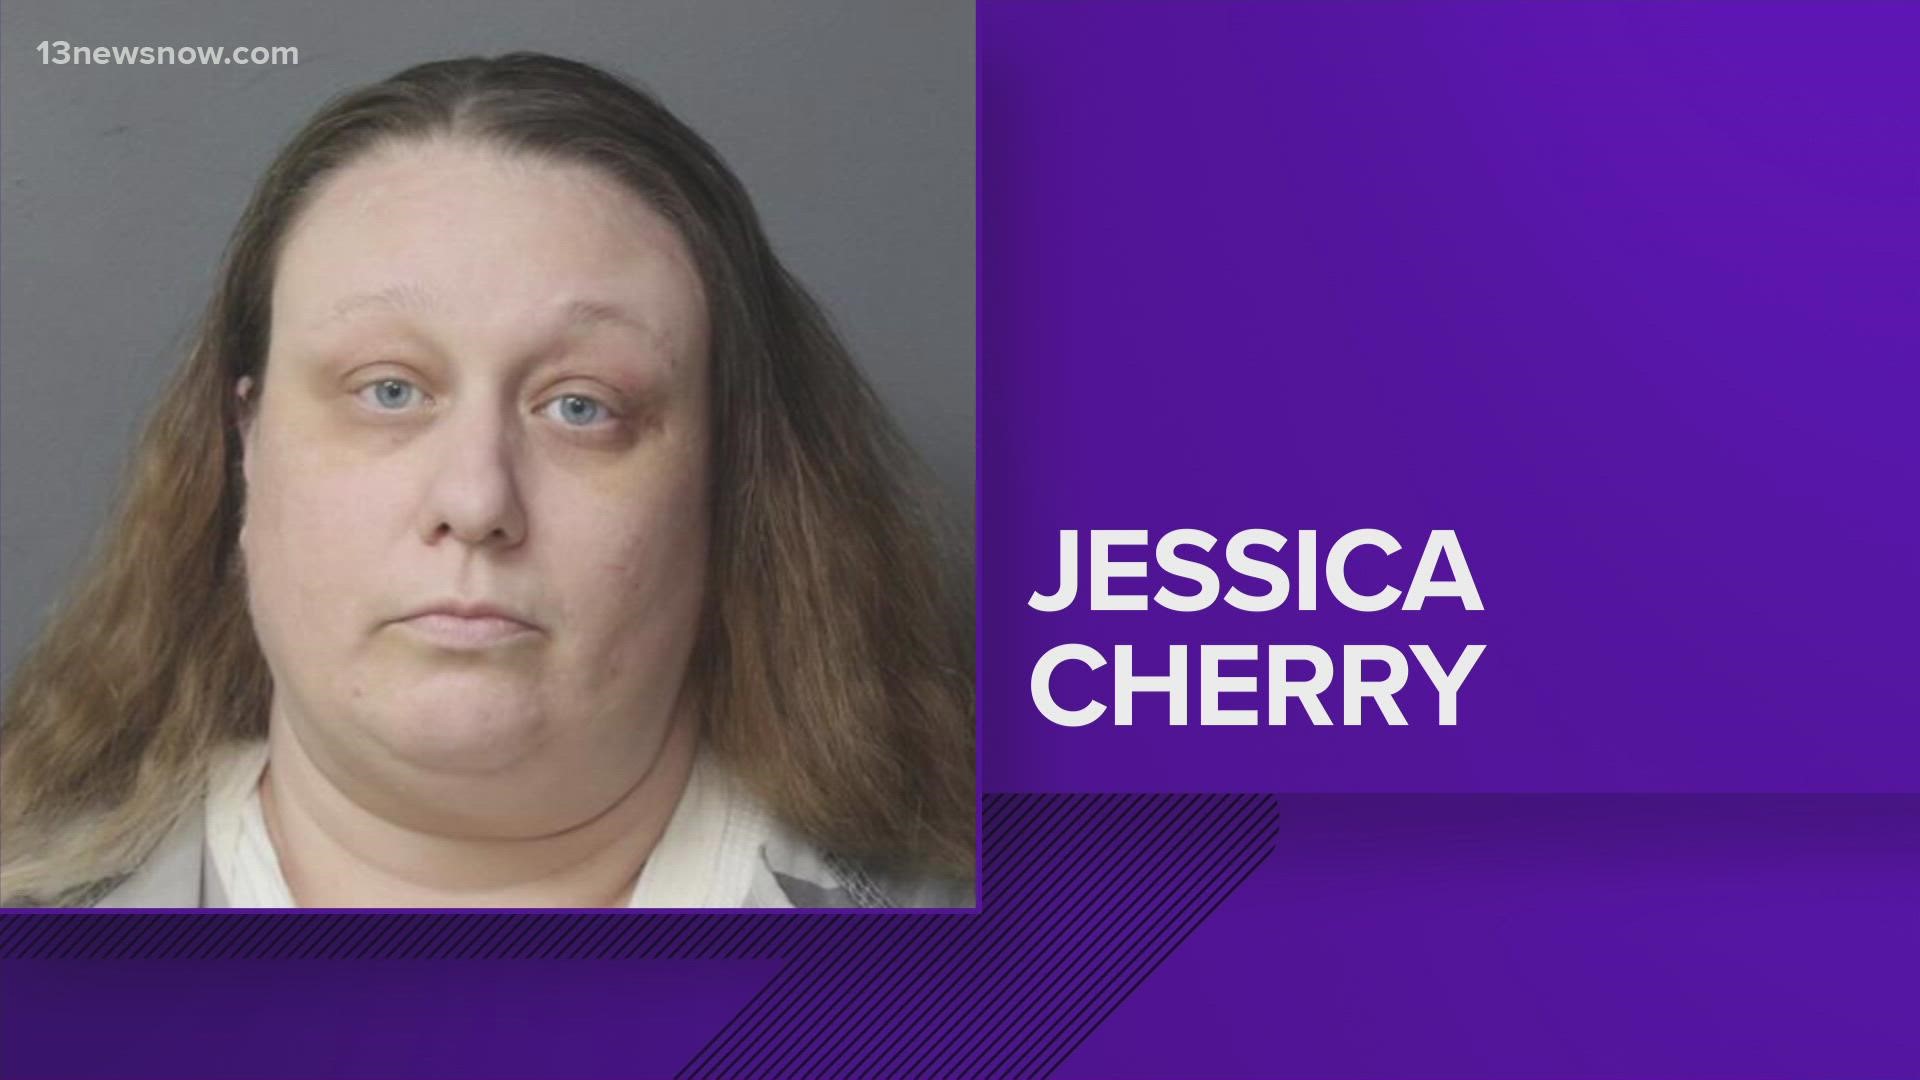 Jurors couldn't decide on a verdict in the child neglect case against Jessica Cherry, a day care provider. A 1-year-old girl was hurt while Cherry was watching her.